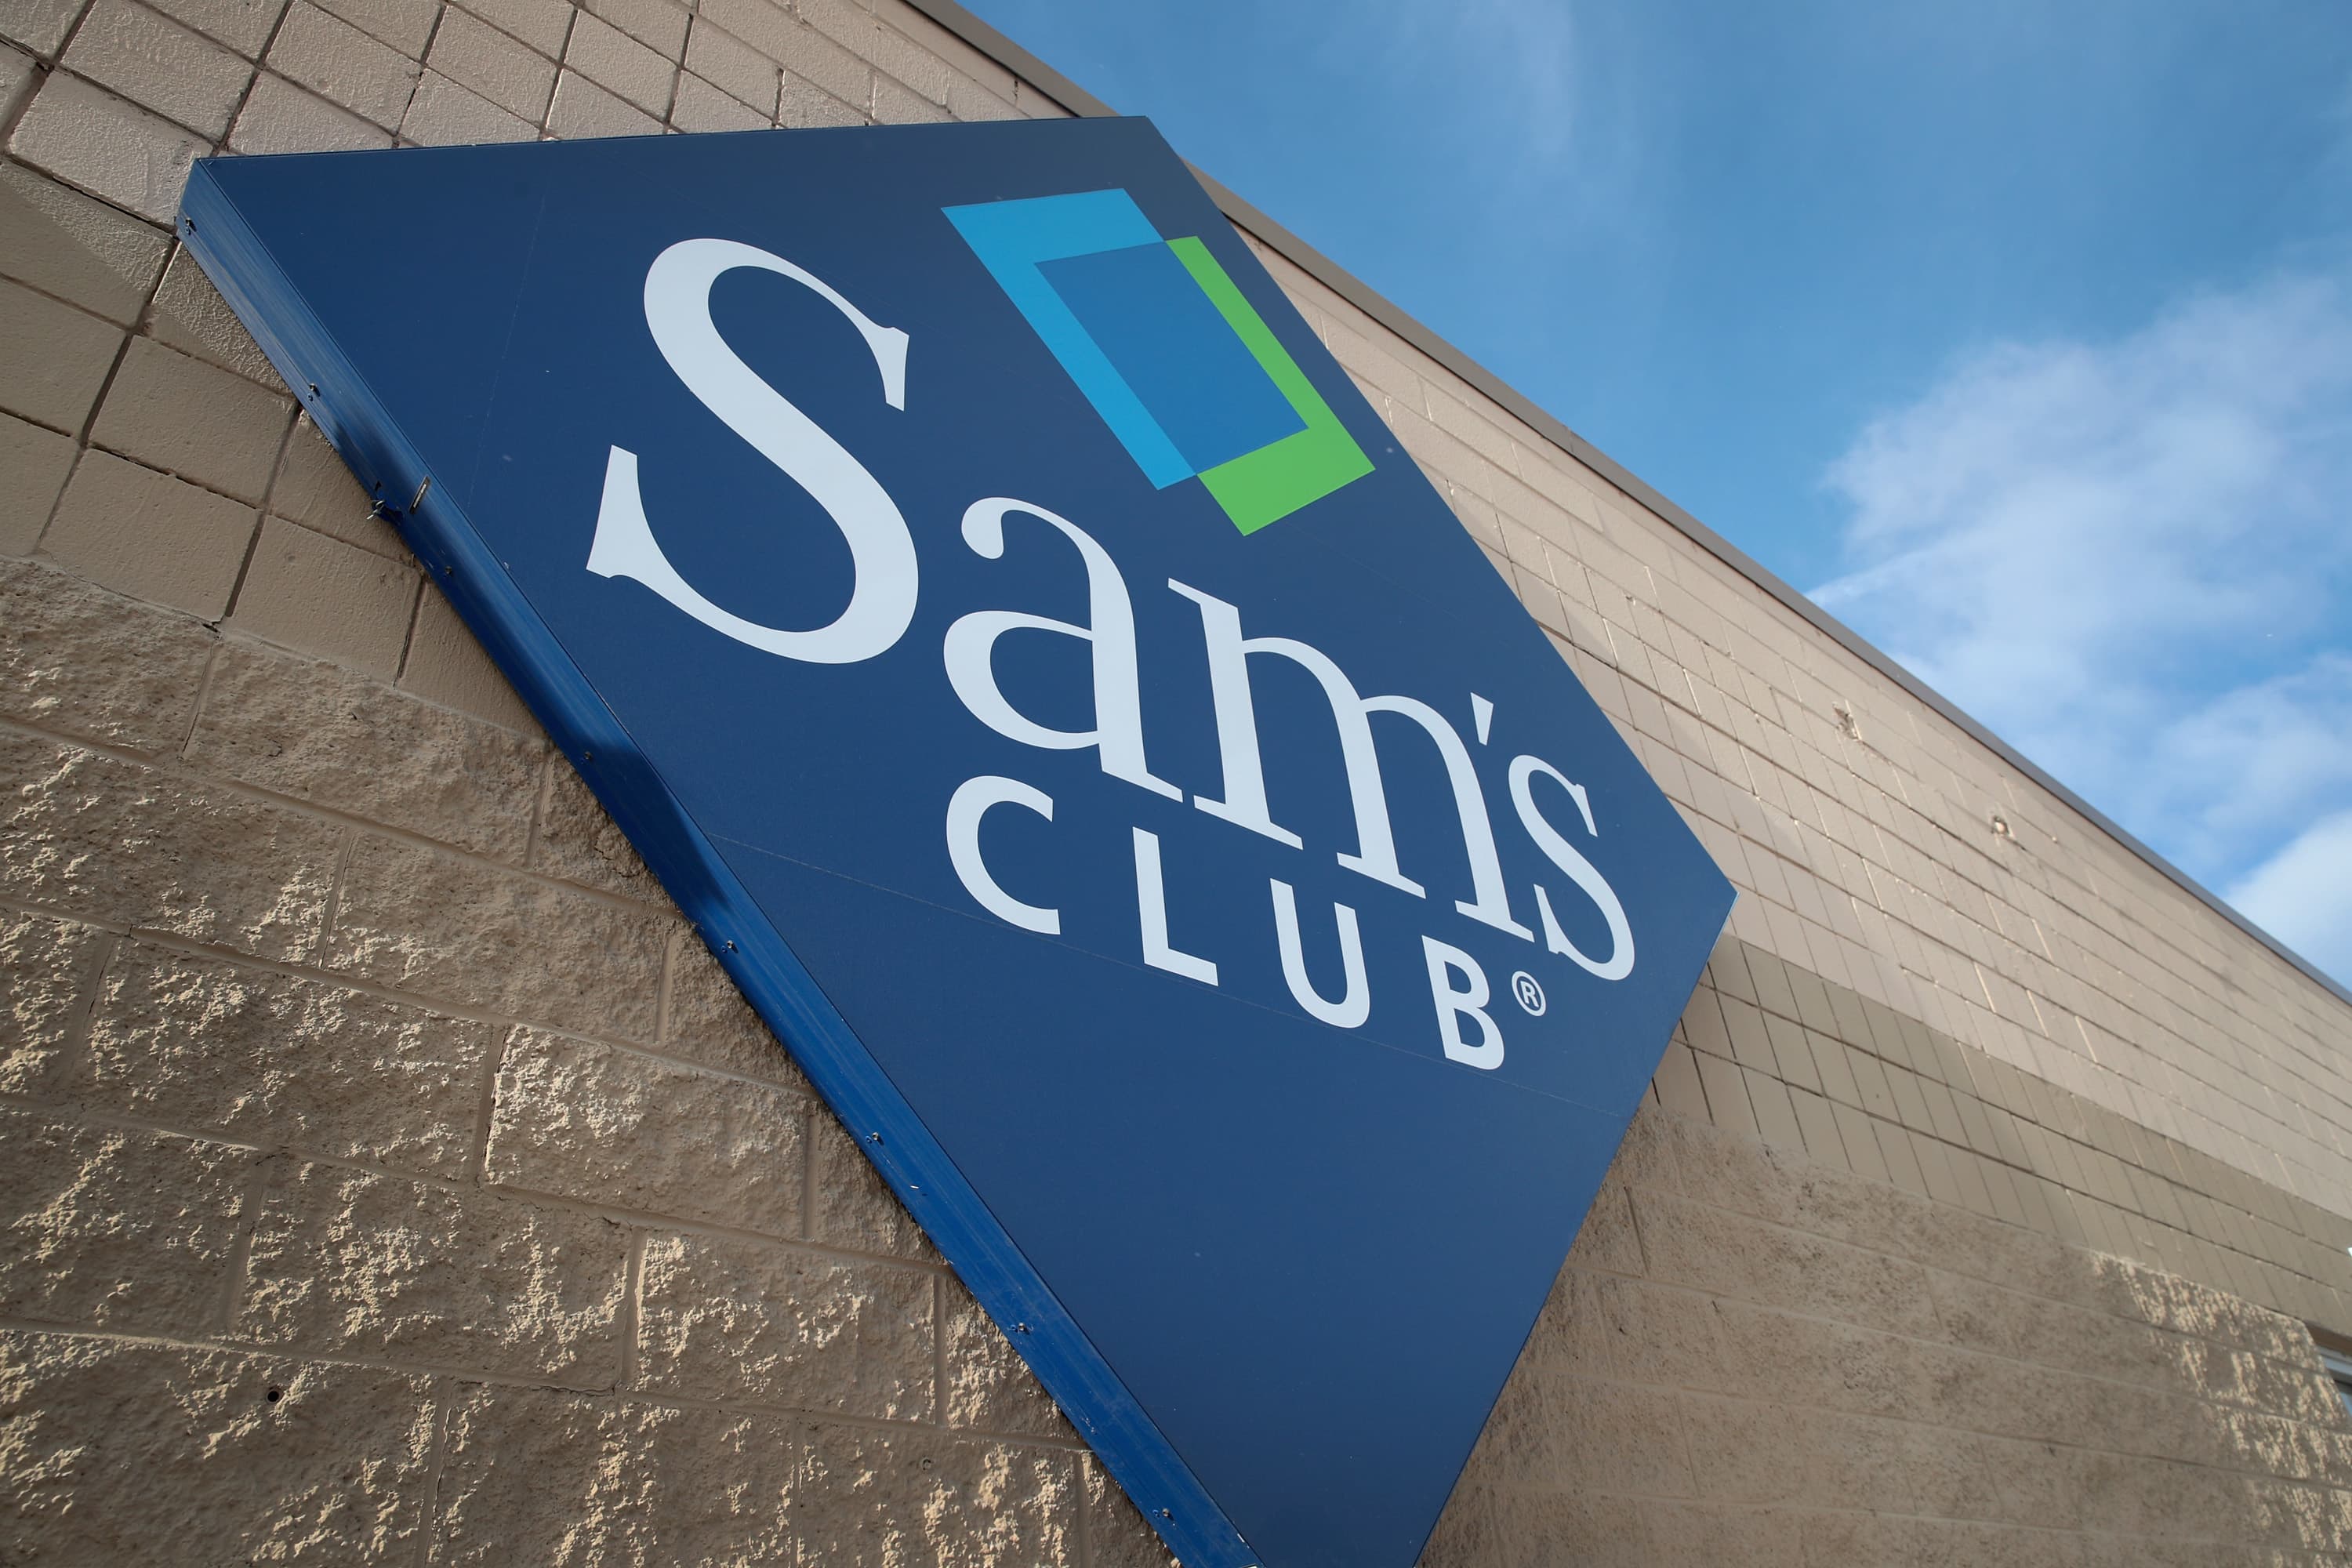 Sam's Club - Wholesale Prices on Top Brands